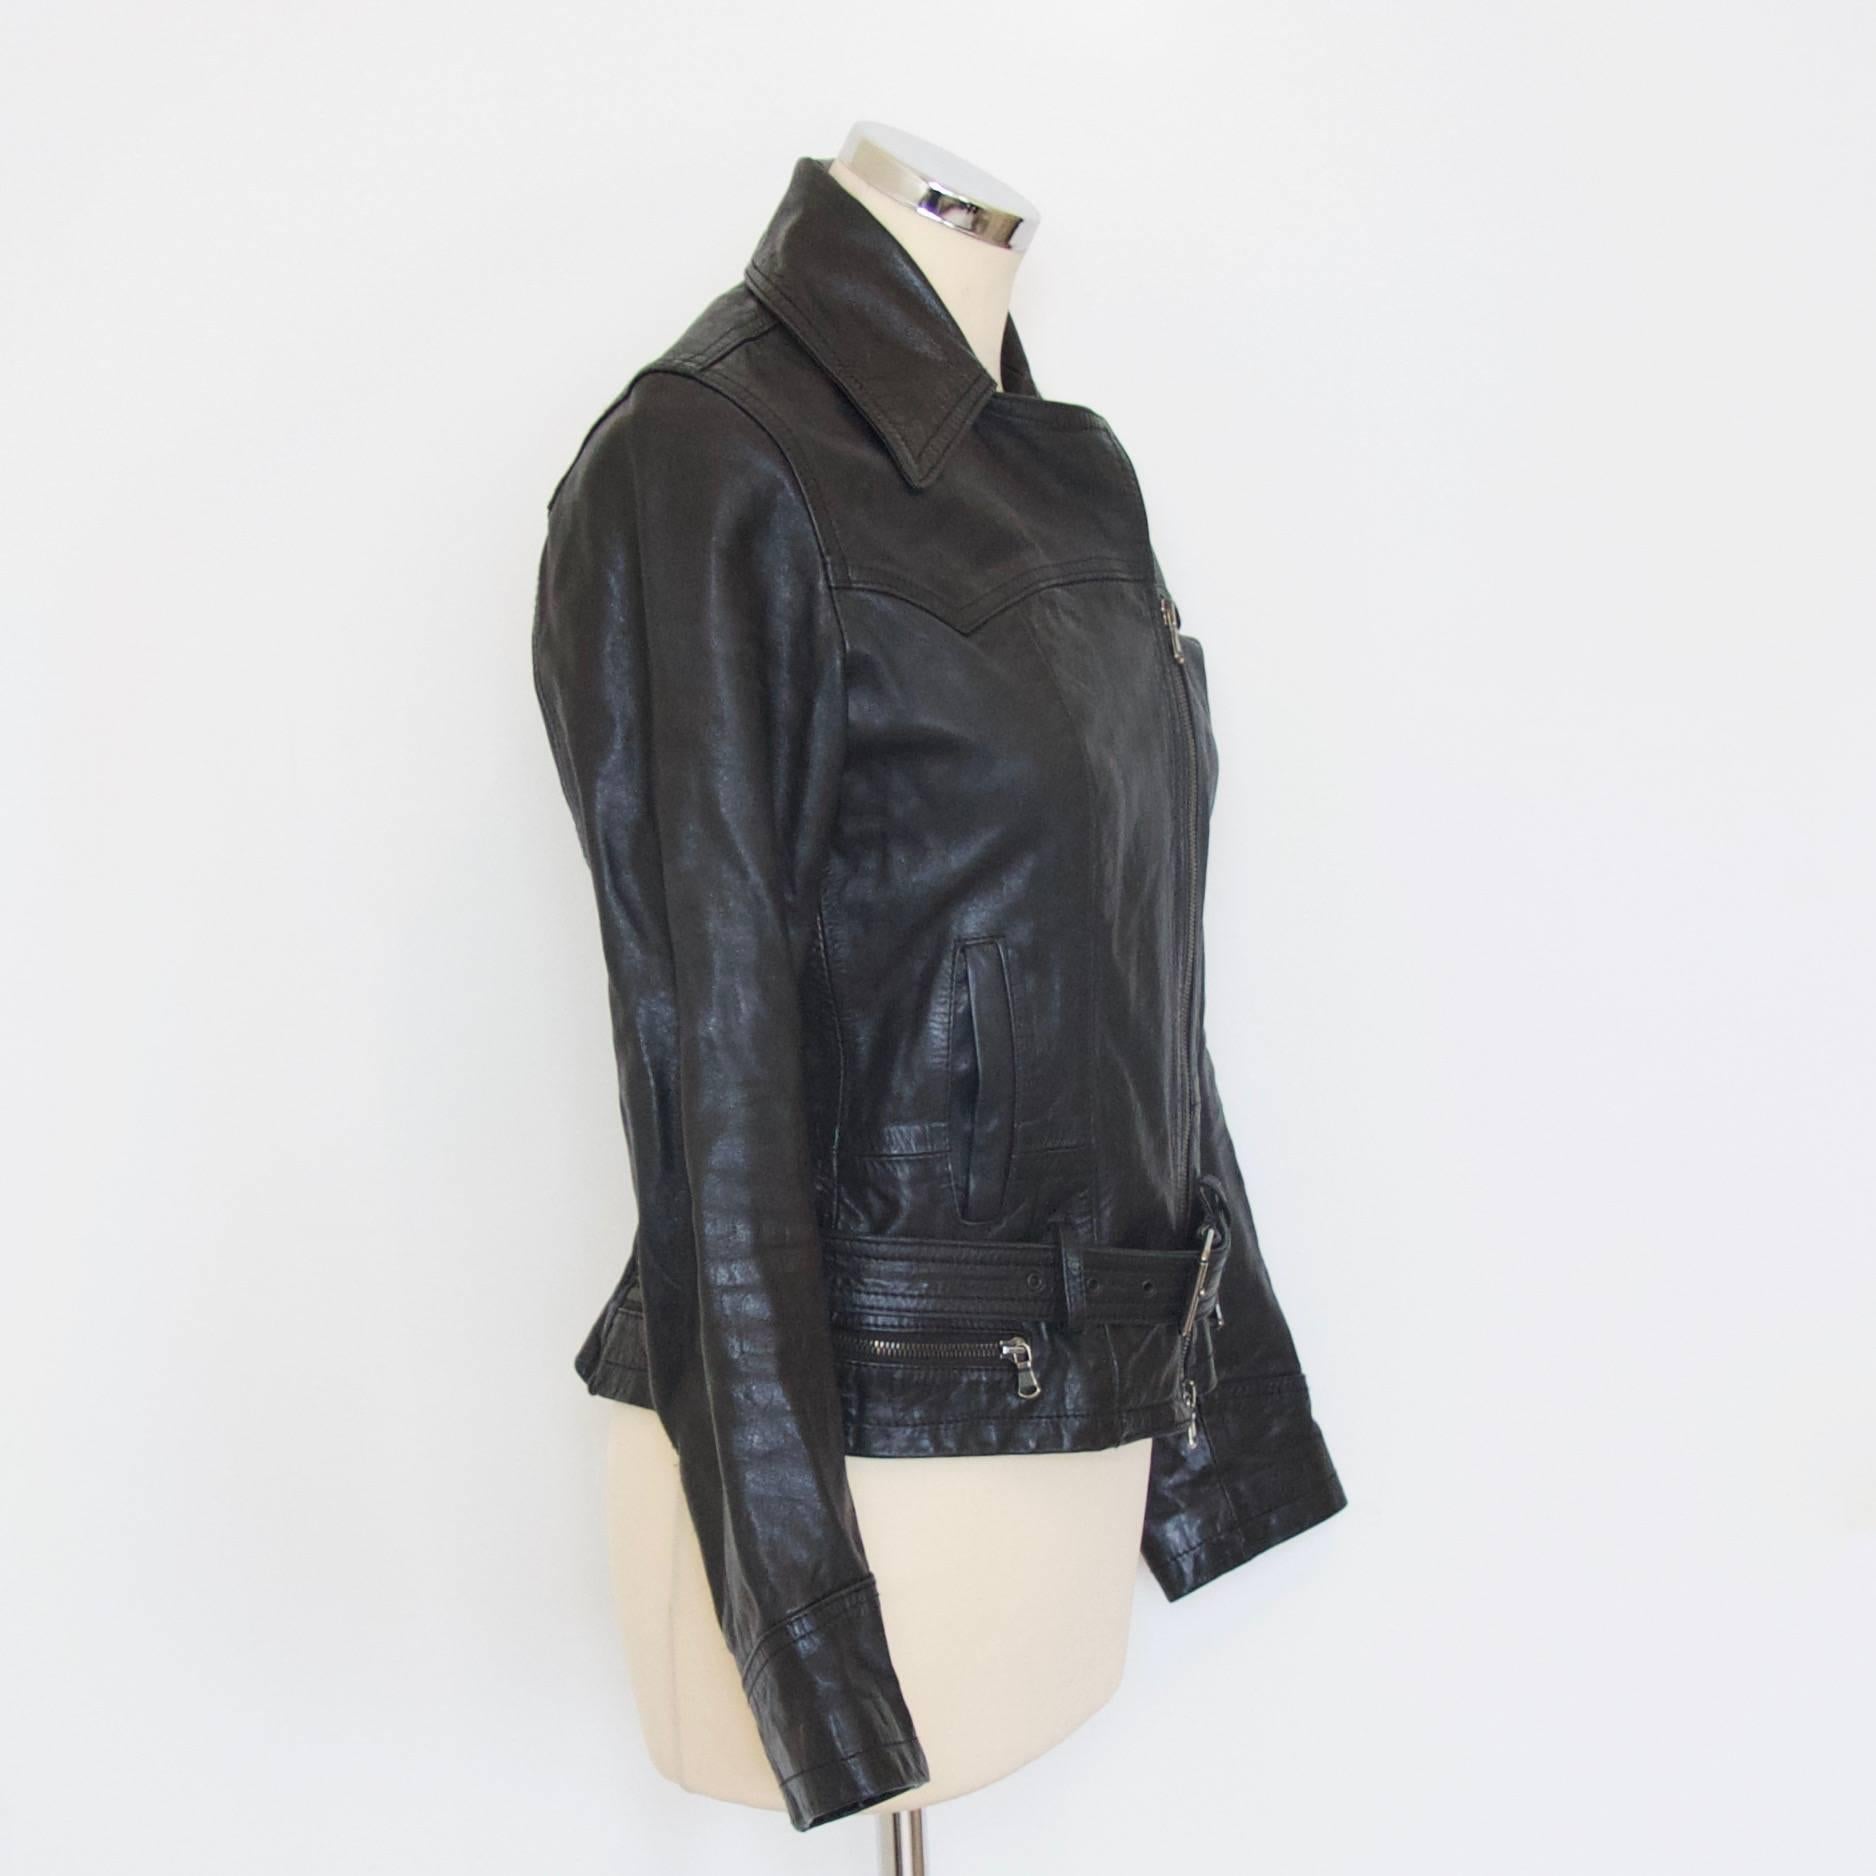 Adriano Goldschmied black leather jacket

100% leather
Lining 70% cotton 30% viscose

Size M